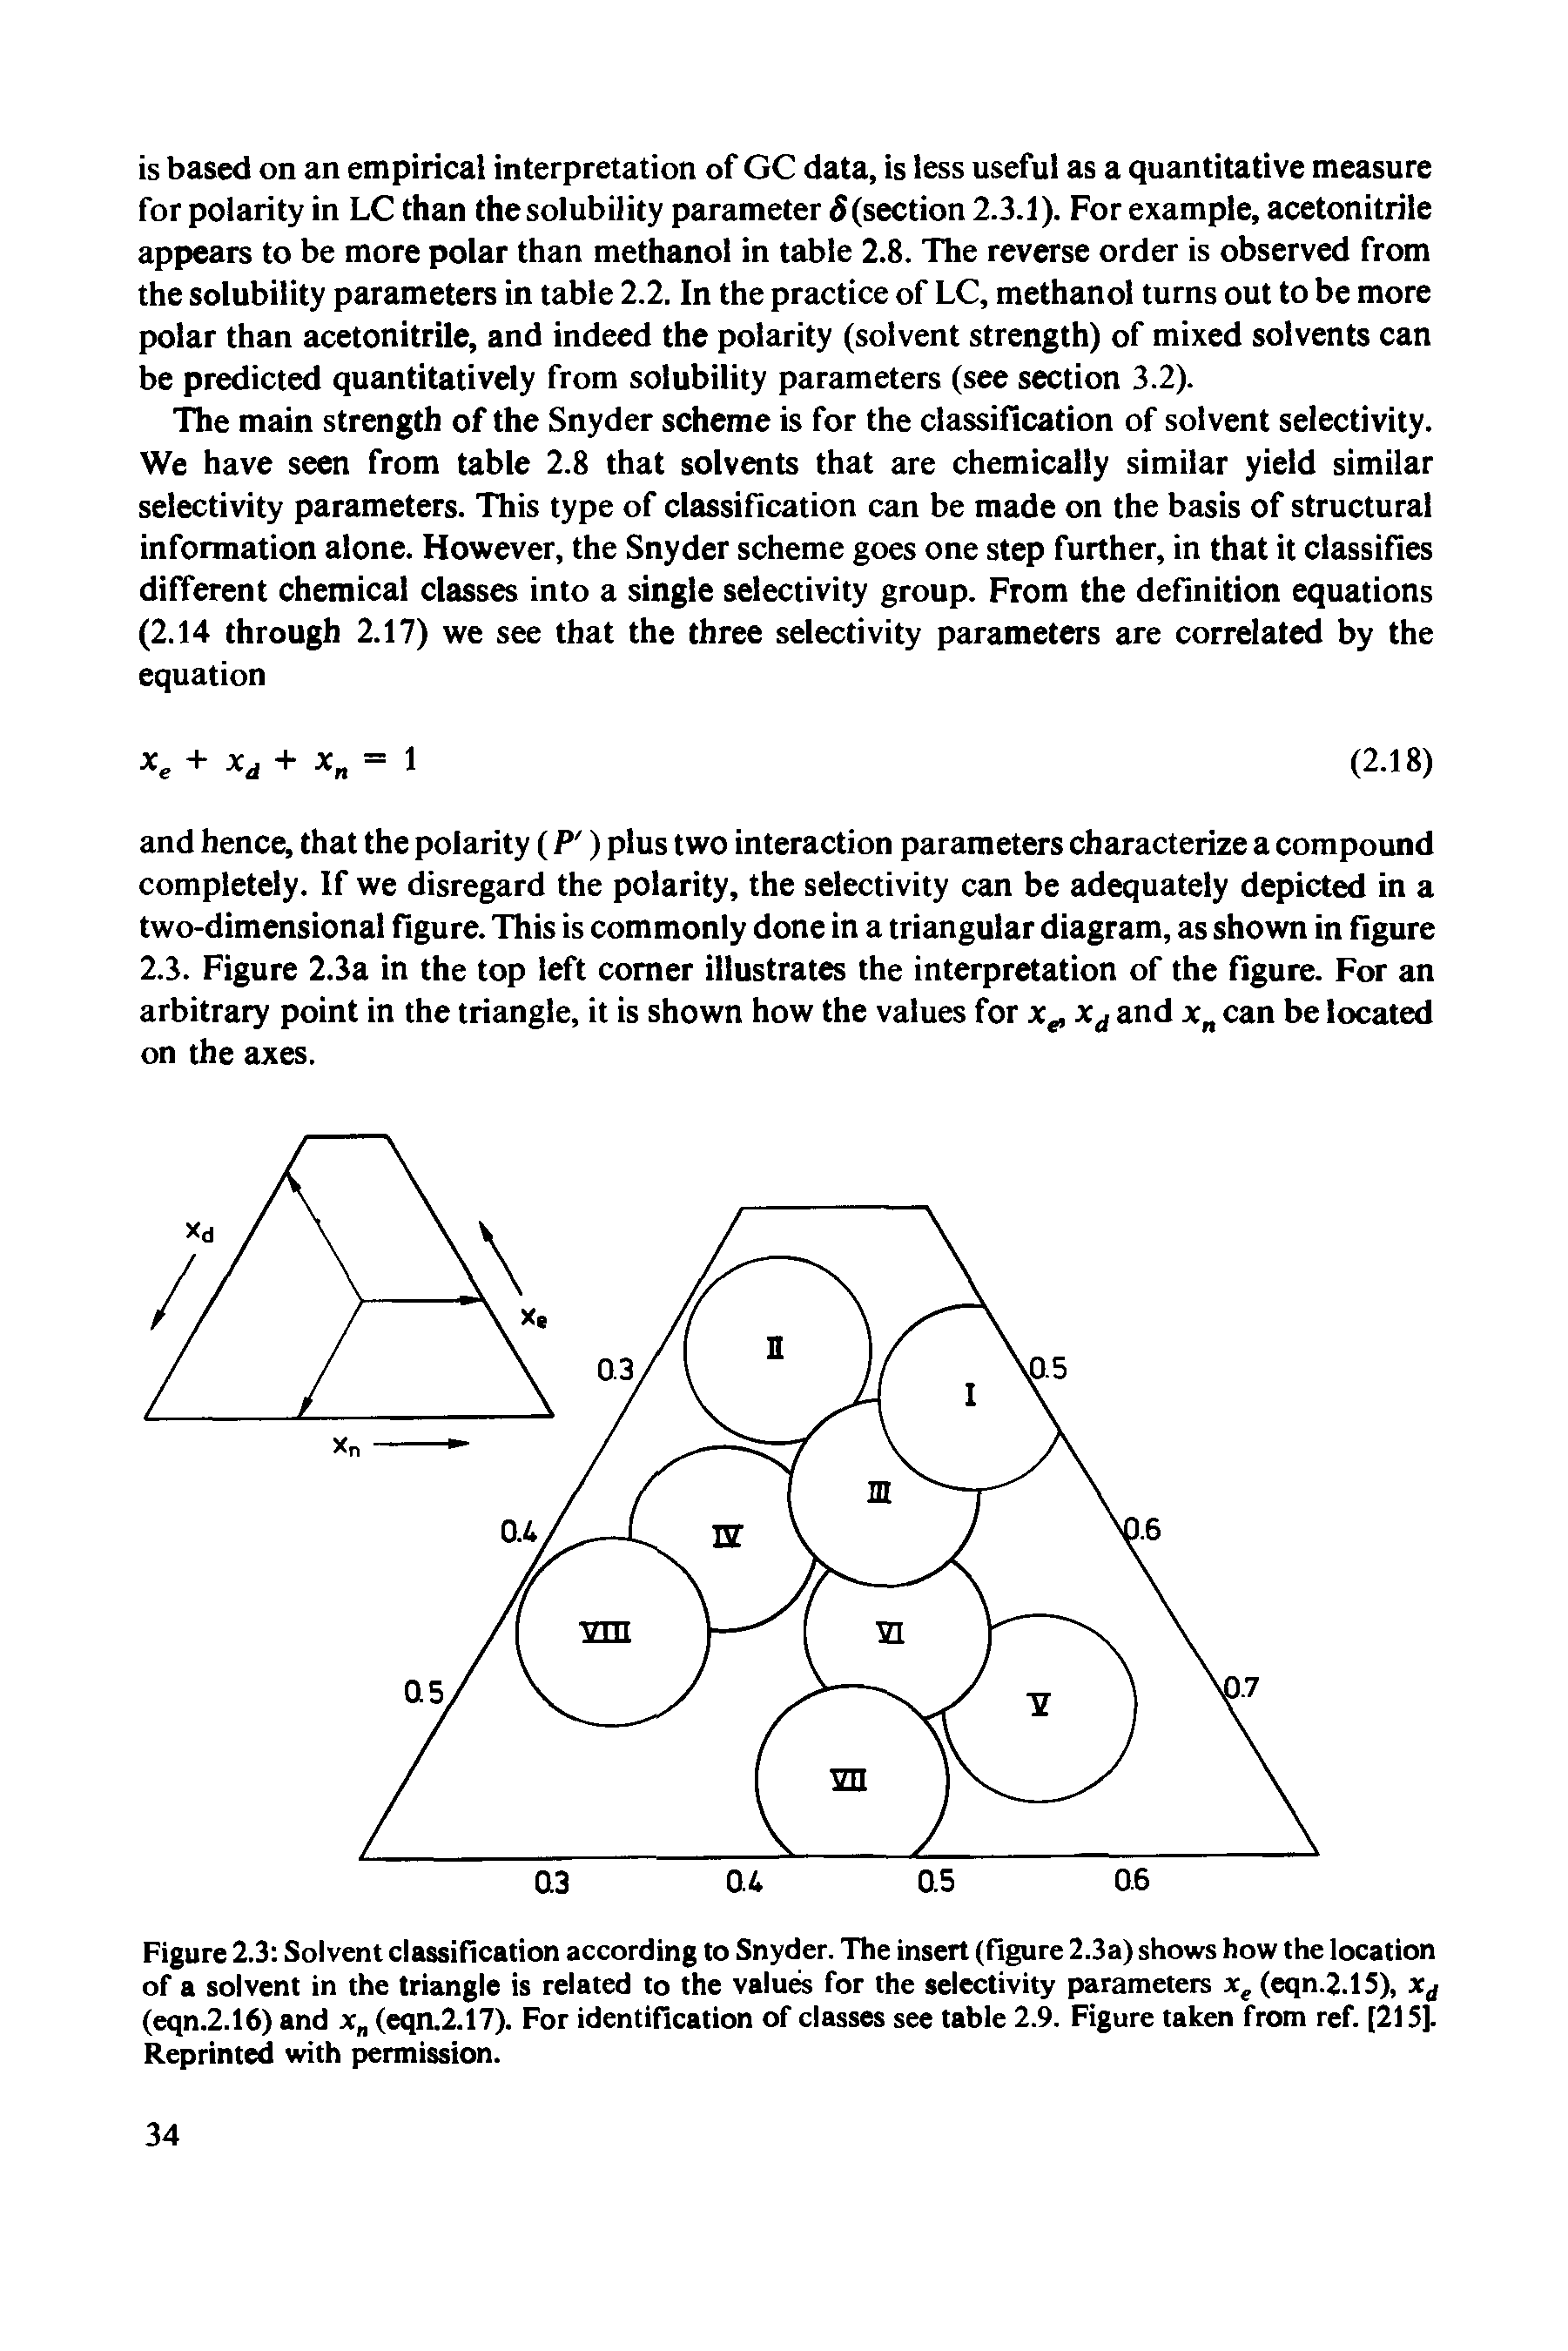 Figure 2.3 Solvent classification according to Snyder. The insert (figure 2.3a) shows how the location of a solvent in the triangle is related to the values for the selectivity parameters xe (eqn.2.15), xd (eqn.2.16) and x (eqn.2.17). For identification of classes see table 2.9. Figure taken from ref. [215]. Reprinted with permission.